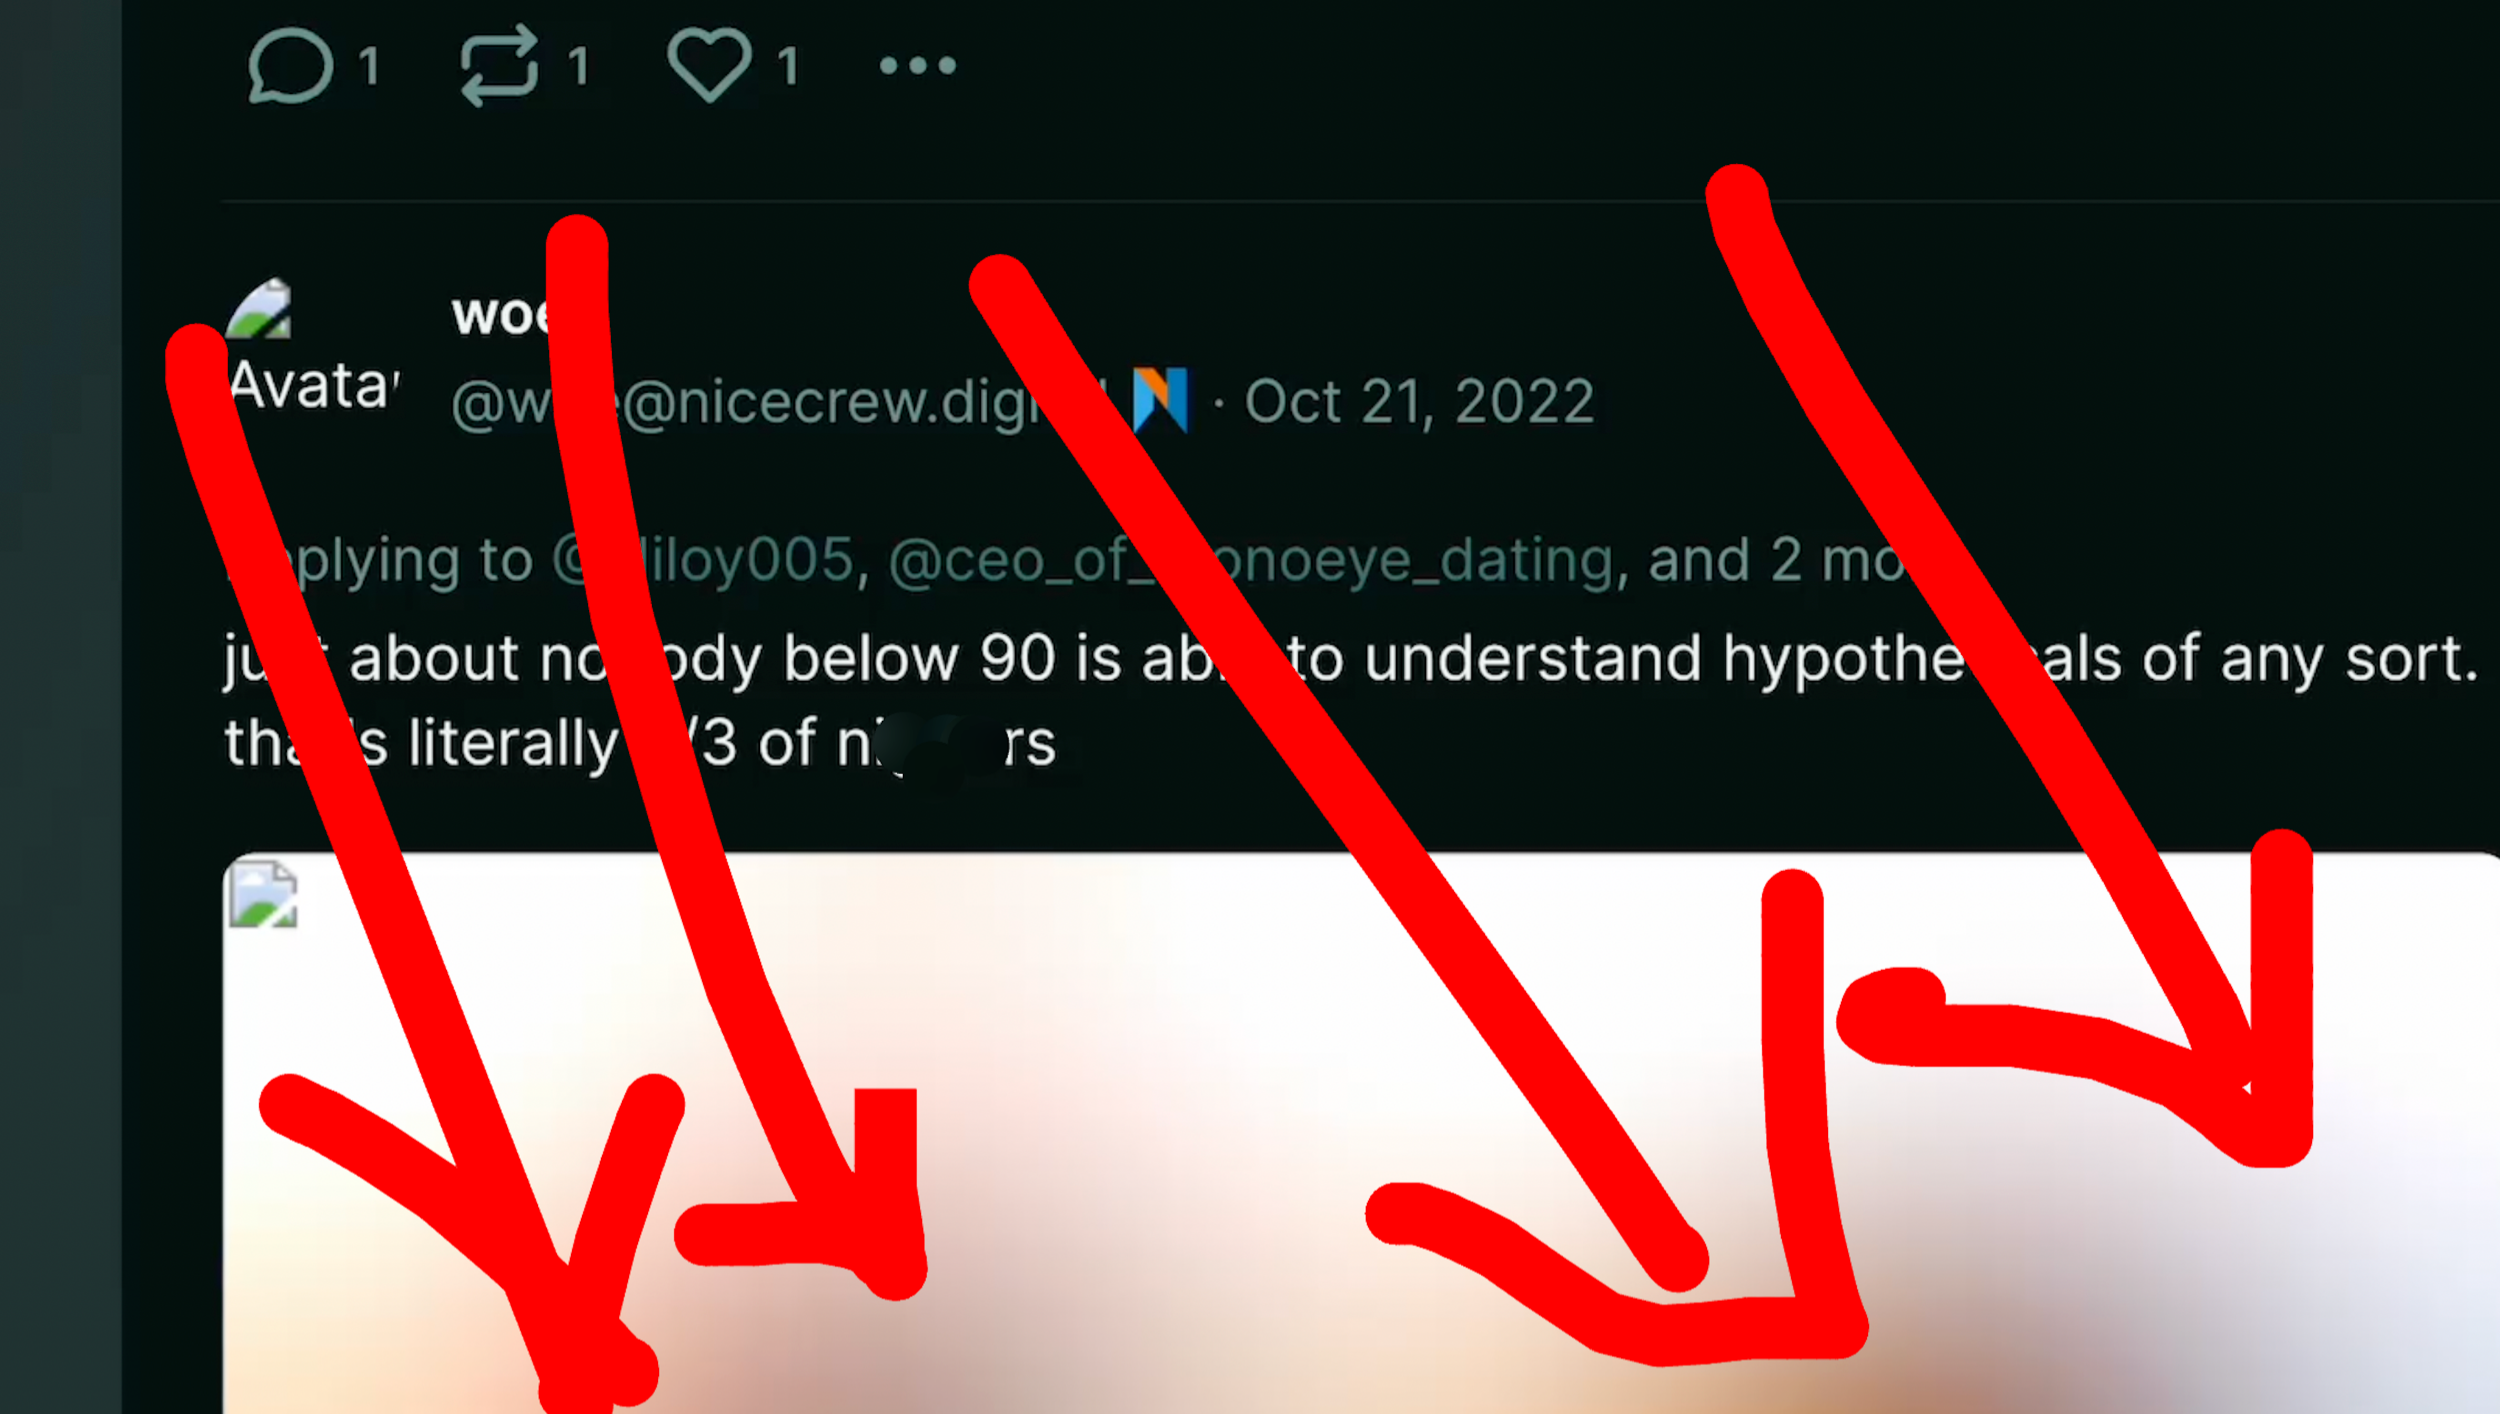 TW anti-Black racism. Dumperth on Poast: "just about nobody below 90 is able to understand hypotheticals of any sort. that is literally 1/3 of n****rs."